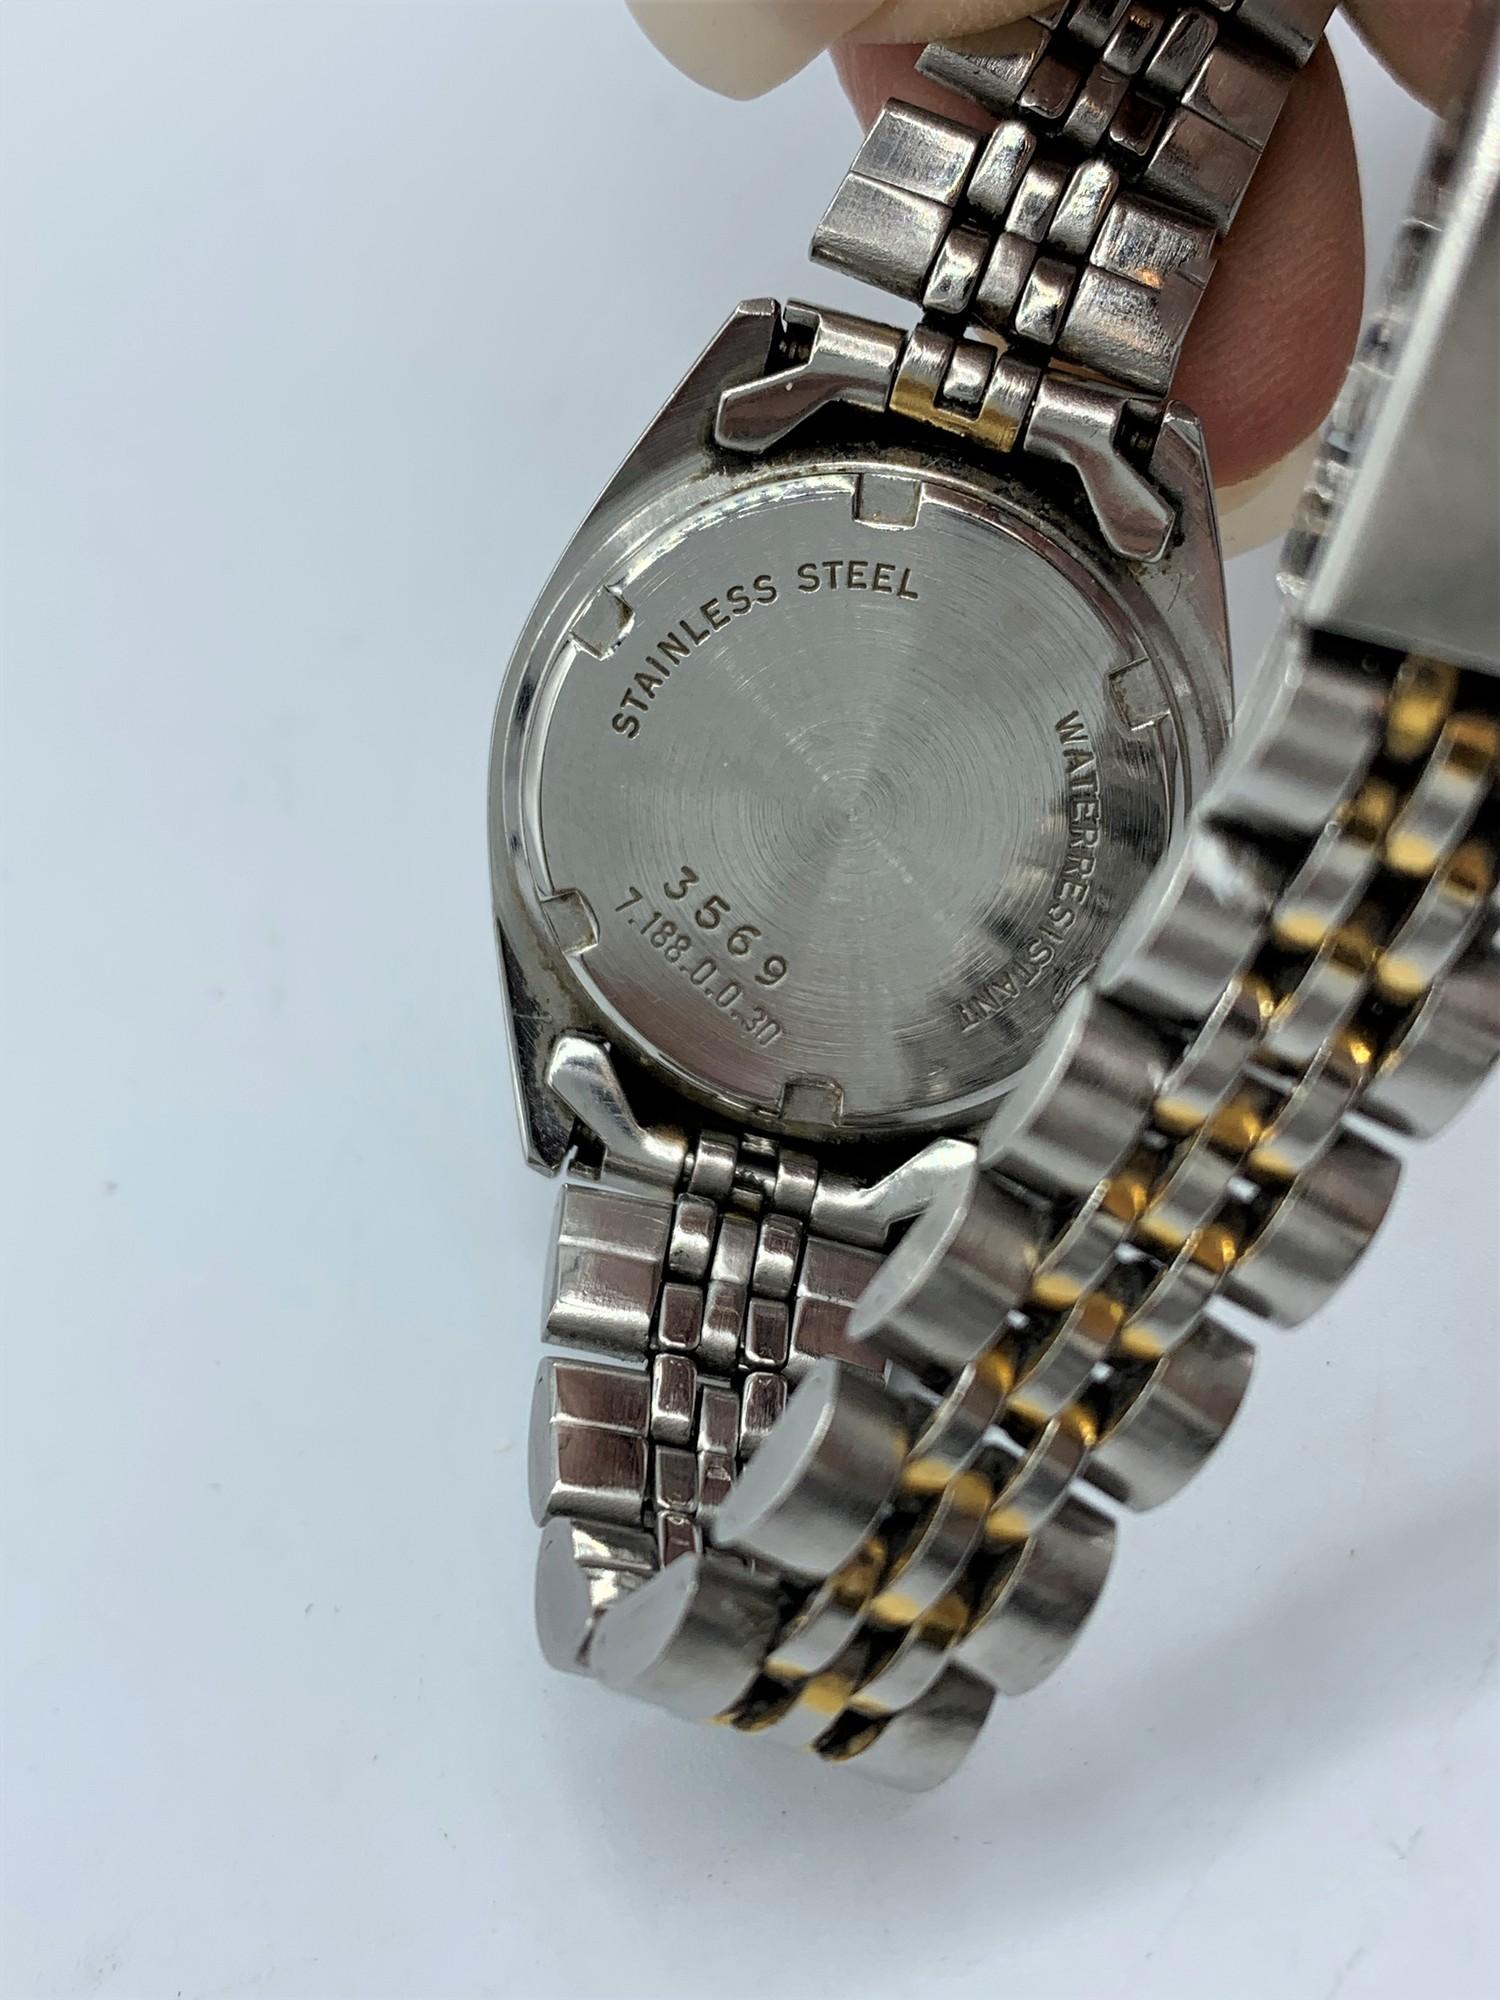 Rotary Ladies Watch quartz movement, in working order. - Image 10 of 10